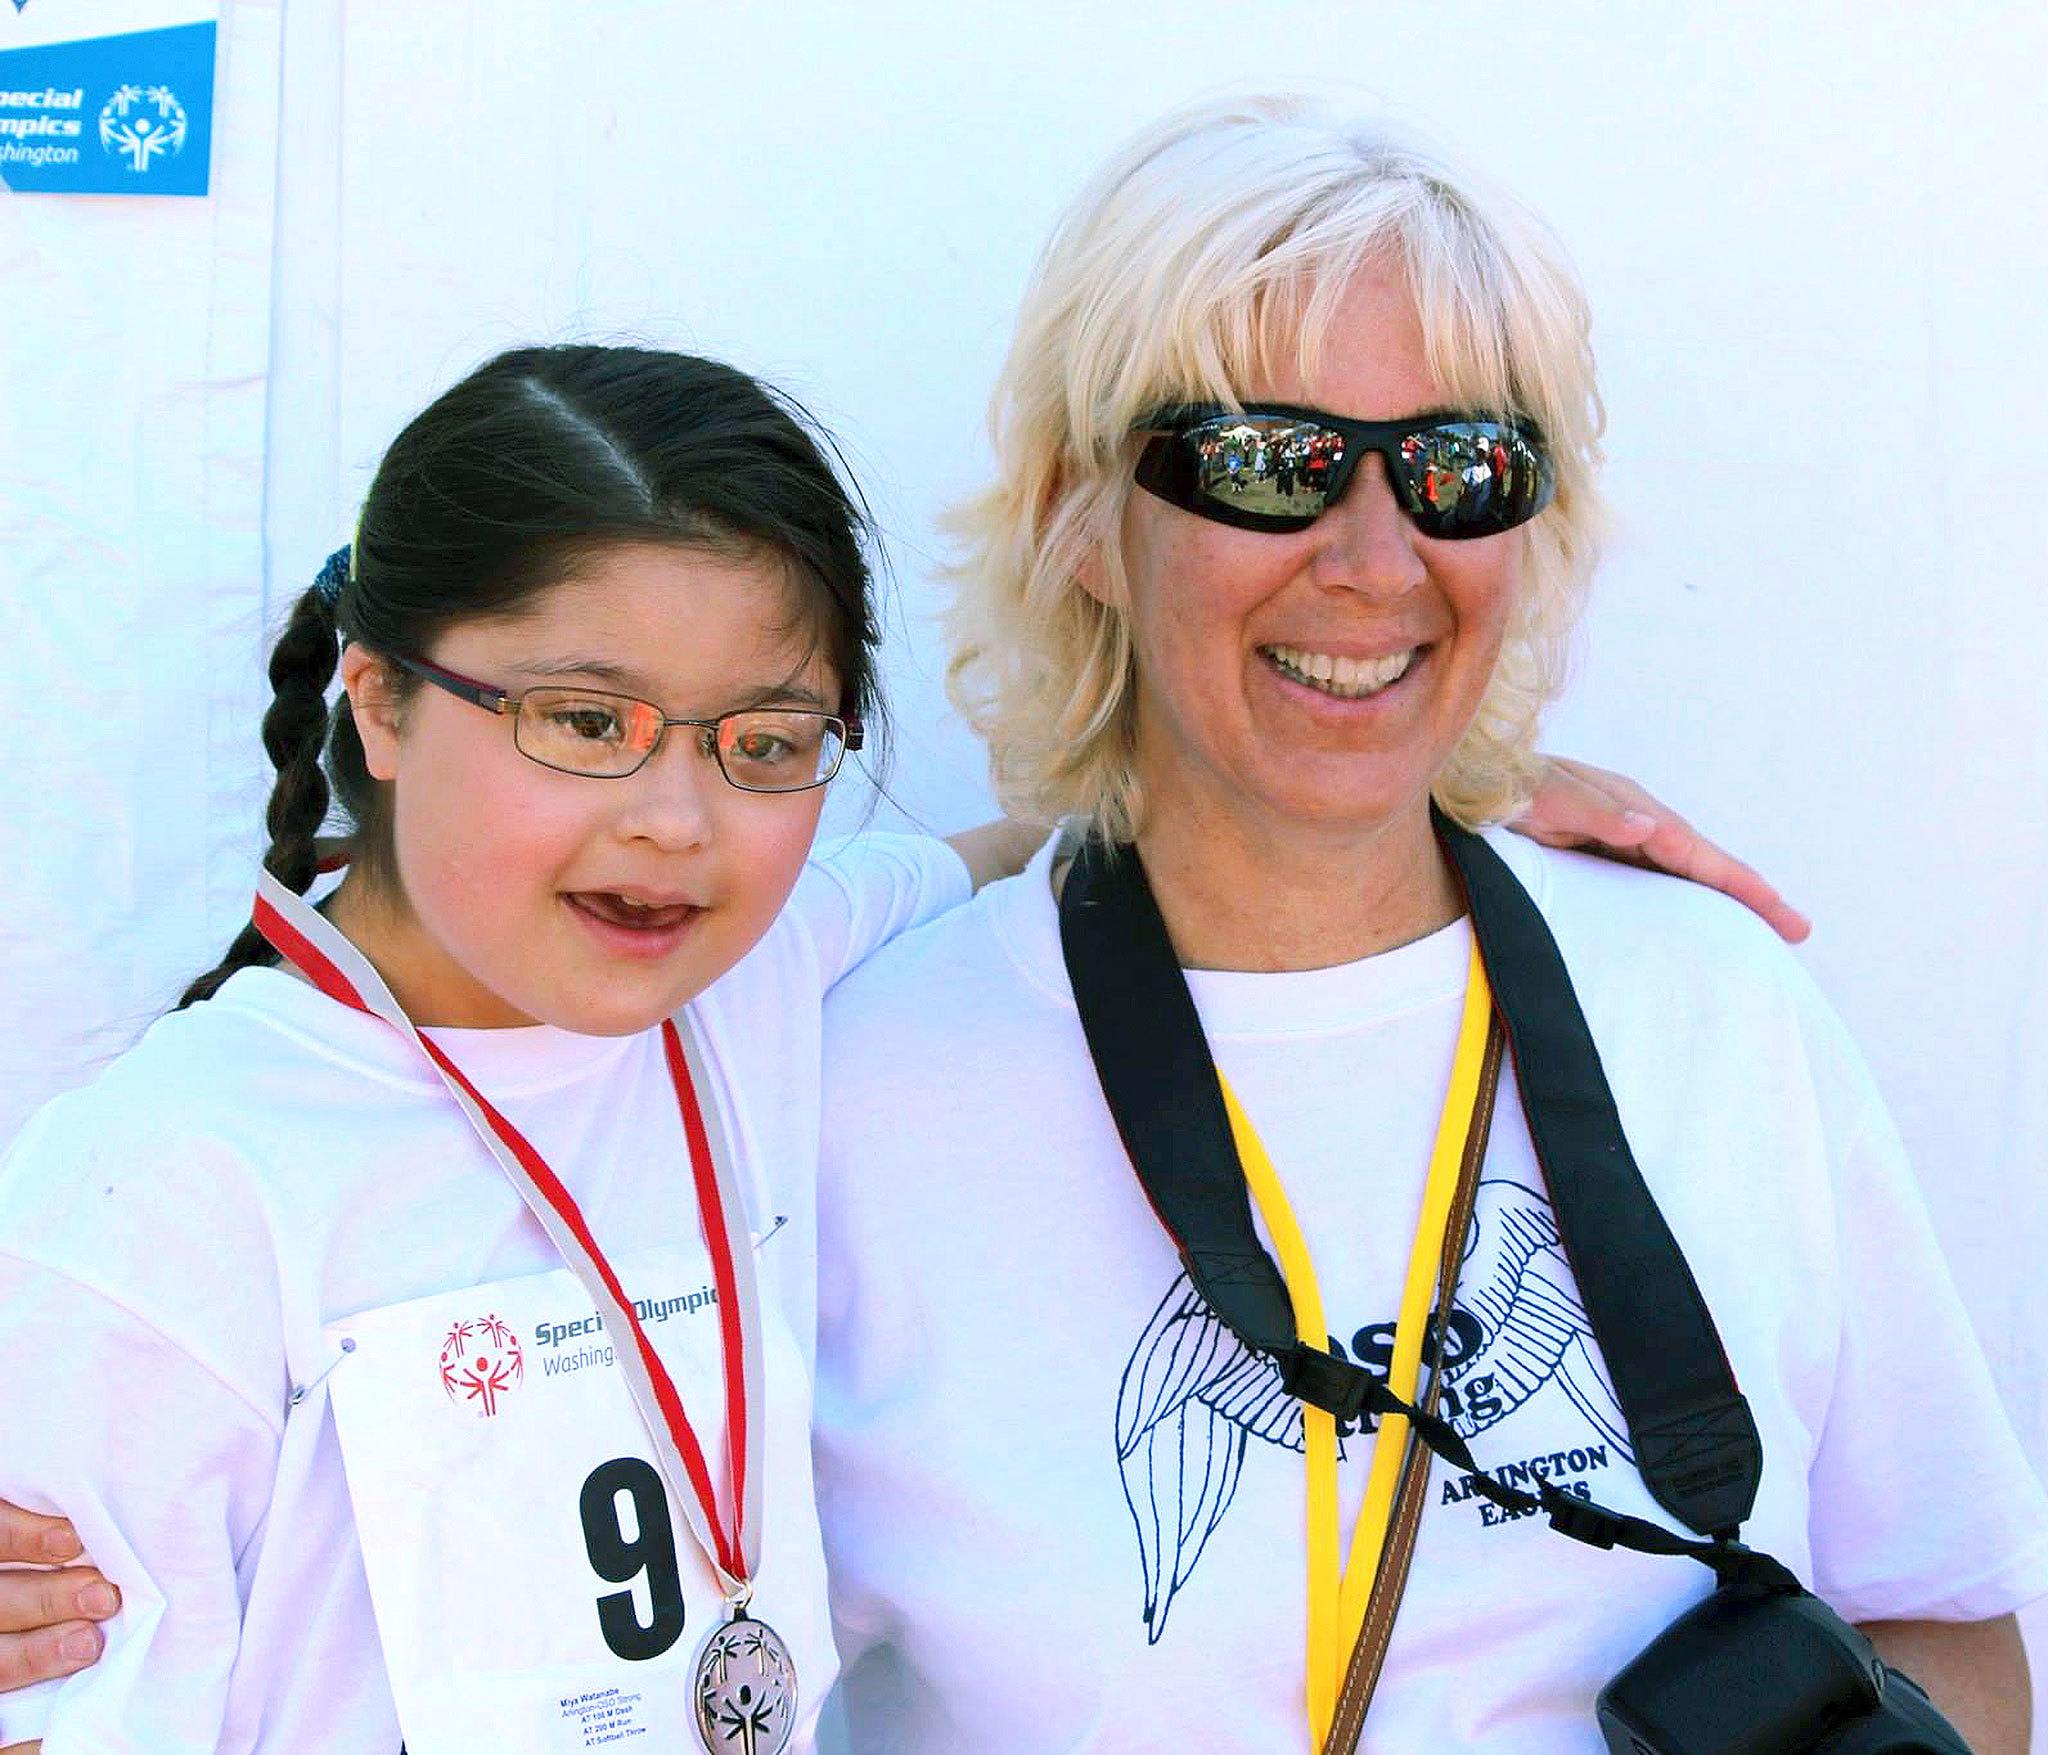 Arlington Eagles coach Sandy Catiis (right) and 8-year-old Miya Watanabe of Arlington pose together after Watanabe won a silver medal in the 200-meter dash in a Special Olympics competition in 2014. (Photo courtesy of Sandy Catiis)